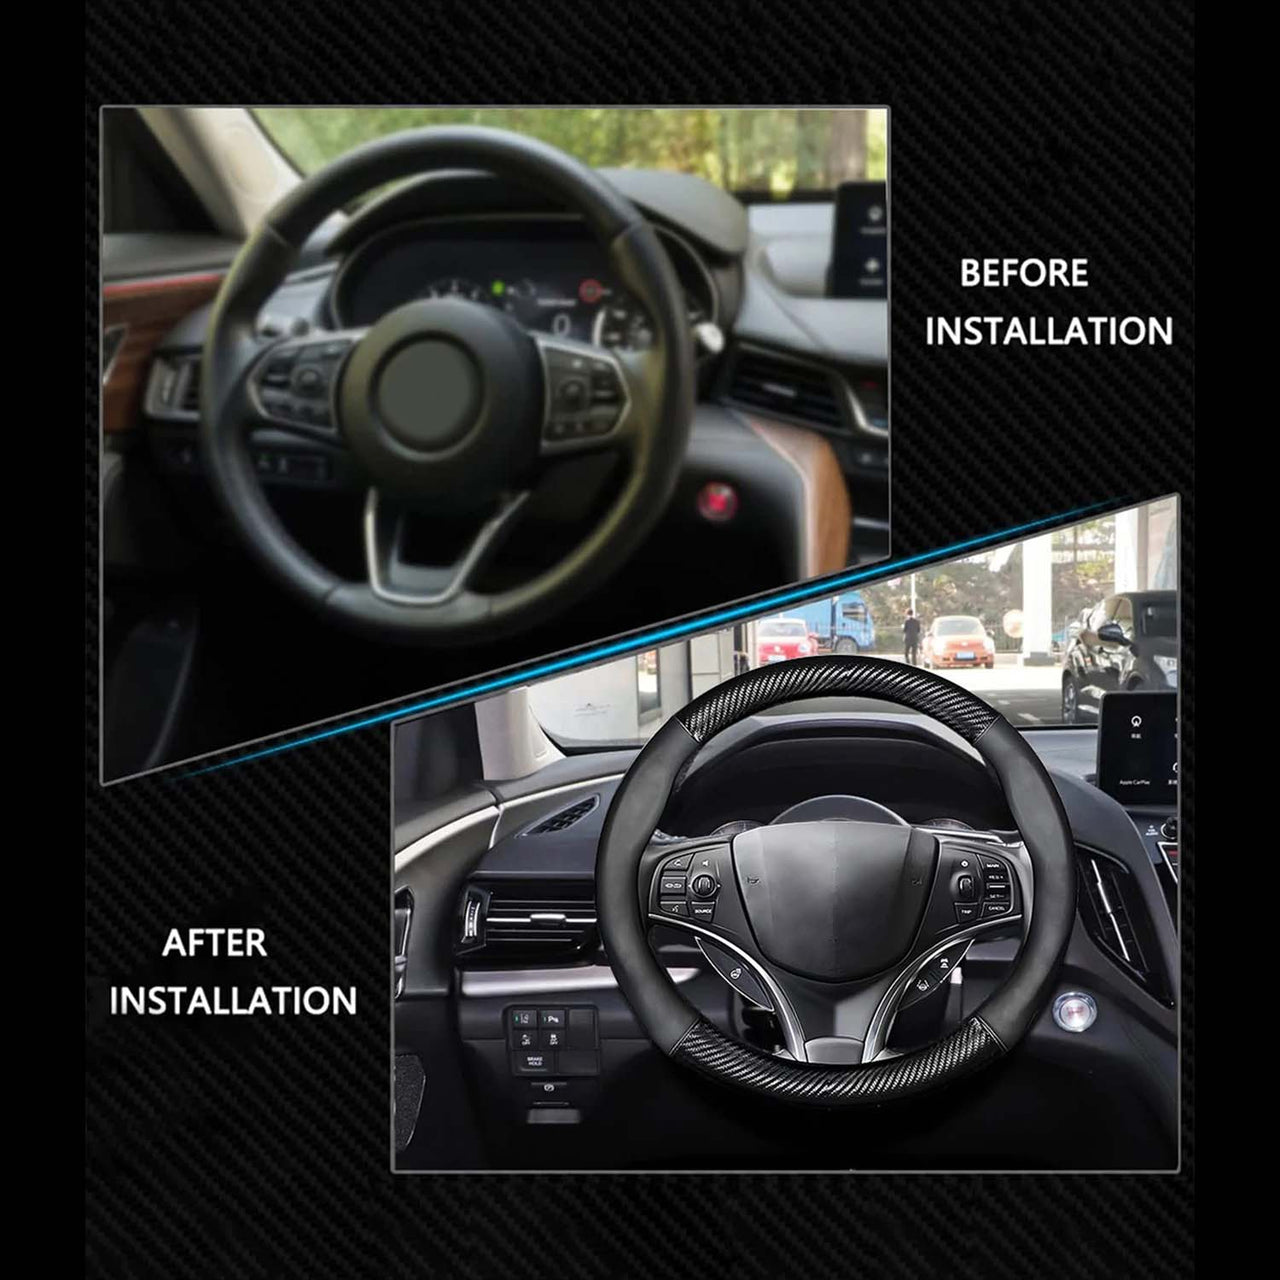 Car Steering Wheel Cover, Custom Fit For Your Cars, Leather Nonslip 3D Carbon Fiber Texture Sport Style Wheel Cover for Women, Interior Modification for All Car Accessories FJ18992